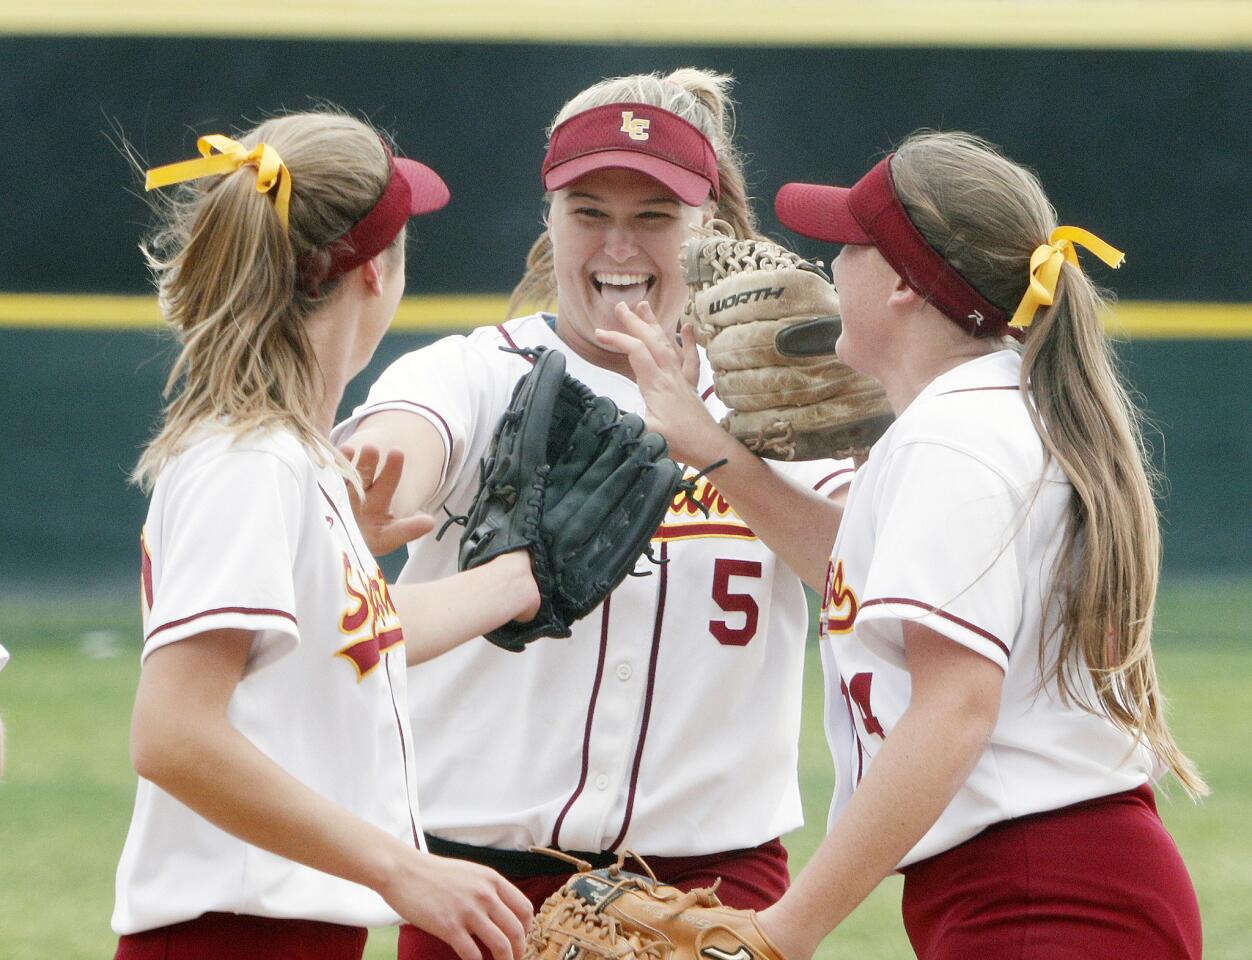 La Canada's Emily Tinkham happily slaps hands with teammates after she turned a double play against West Valley in a CIF Southern Section Division V first-round playoff softball game at La Canada High School on Thursday, May 17, 2018. La Canada won the game 4-1.